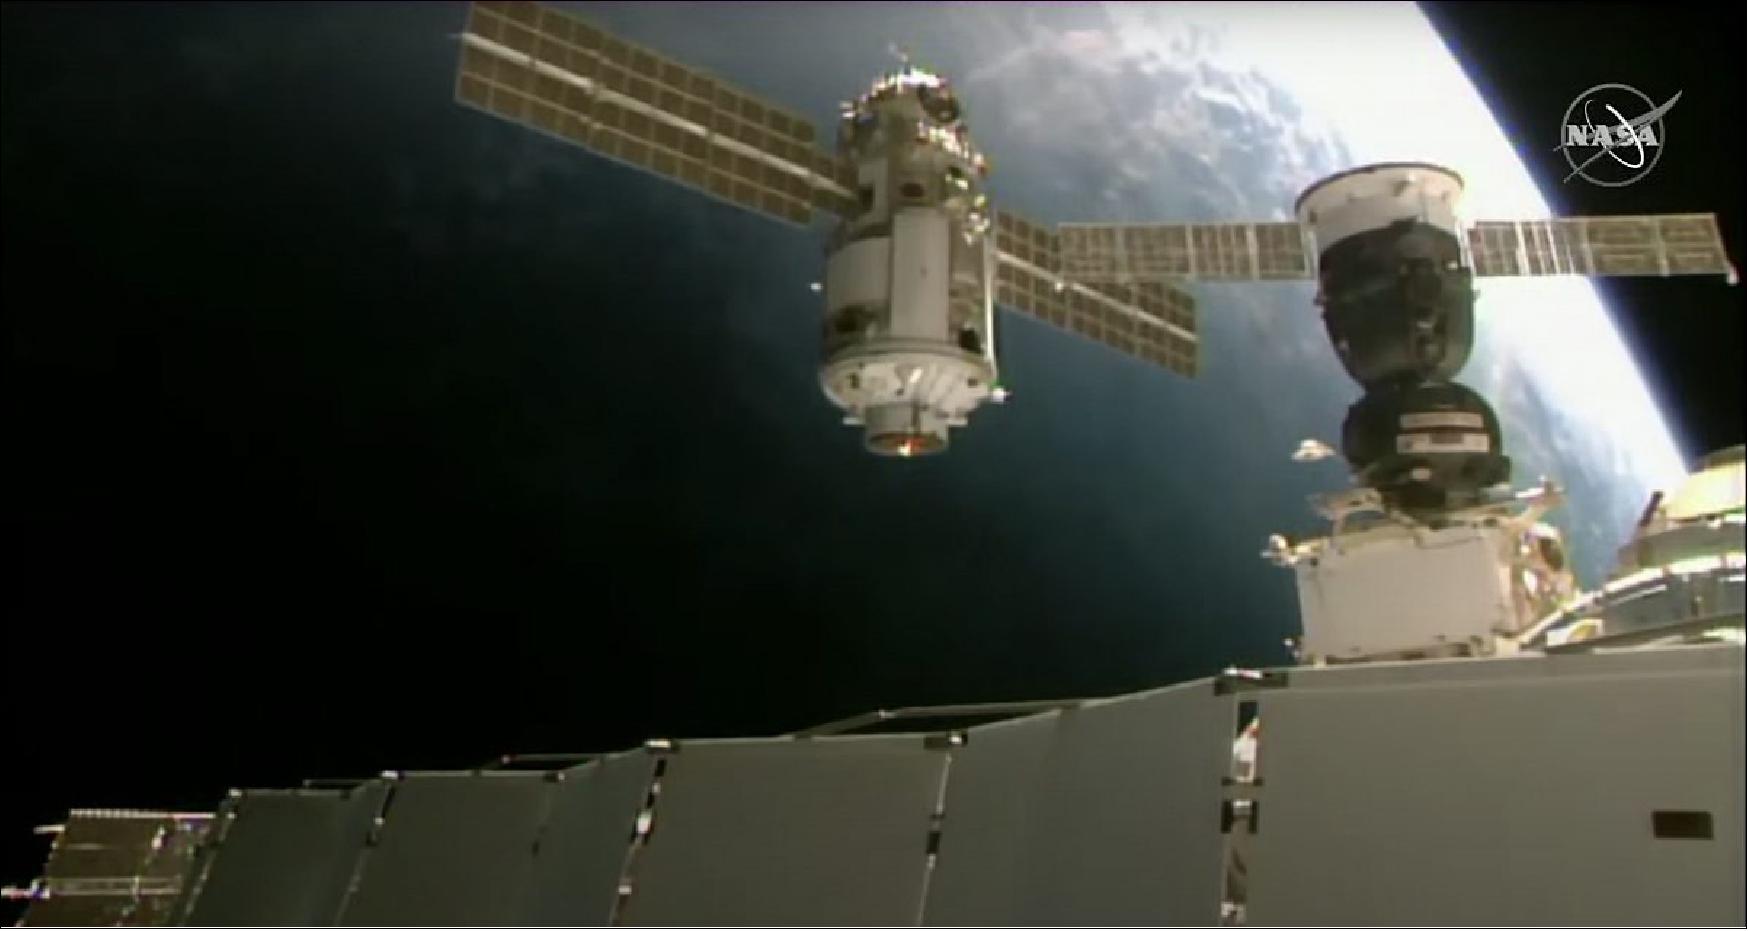 Figure 10: Nauka approaches the space station, preparing to dock (image credit: NASA TV)